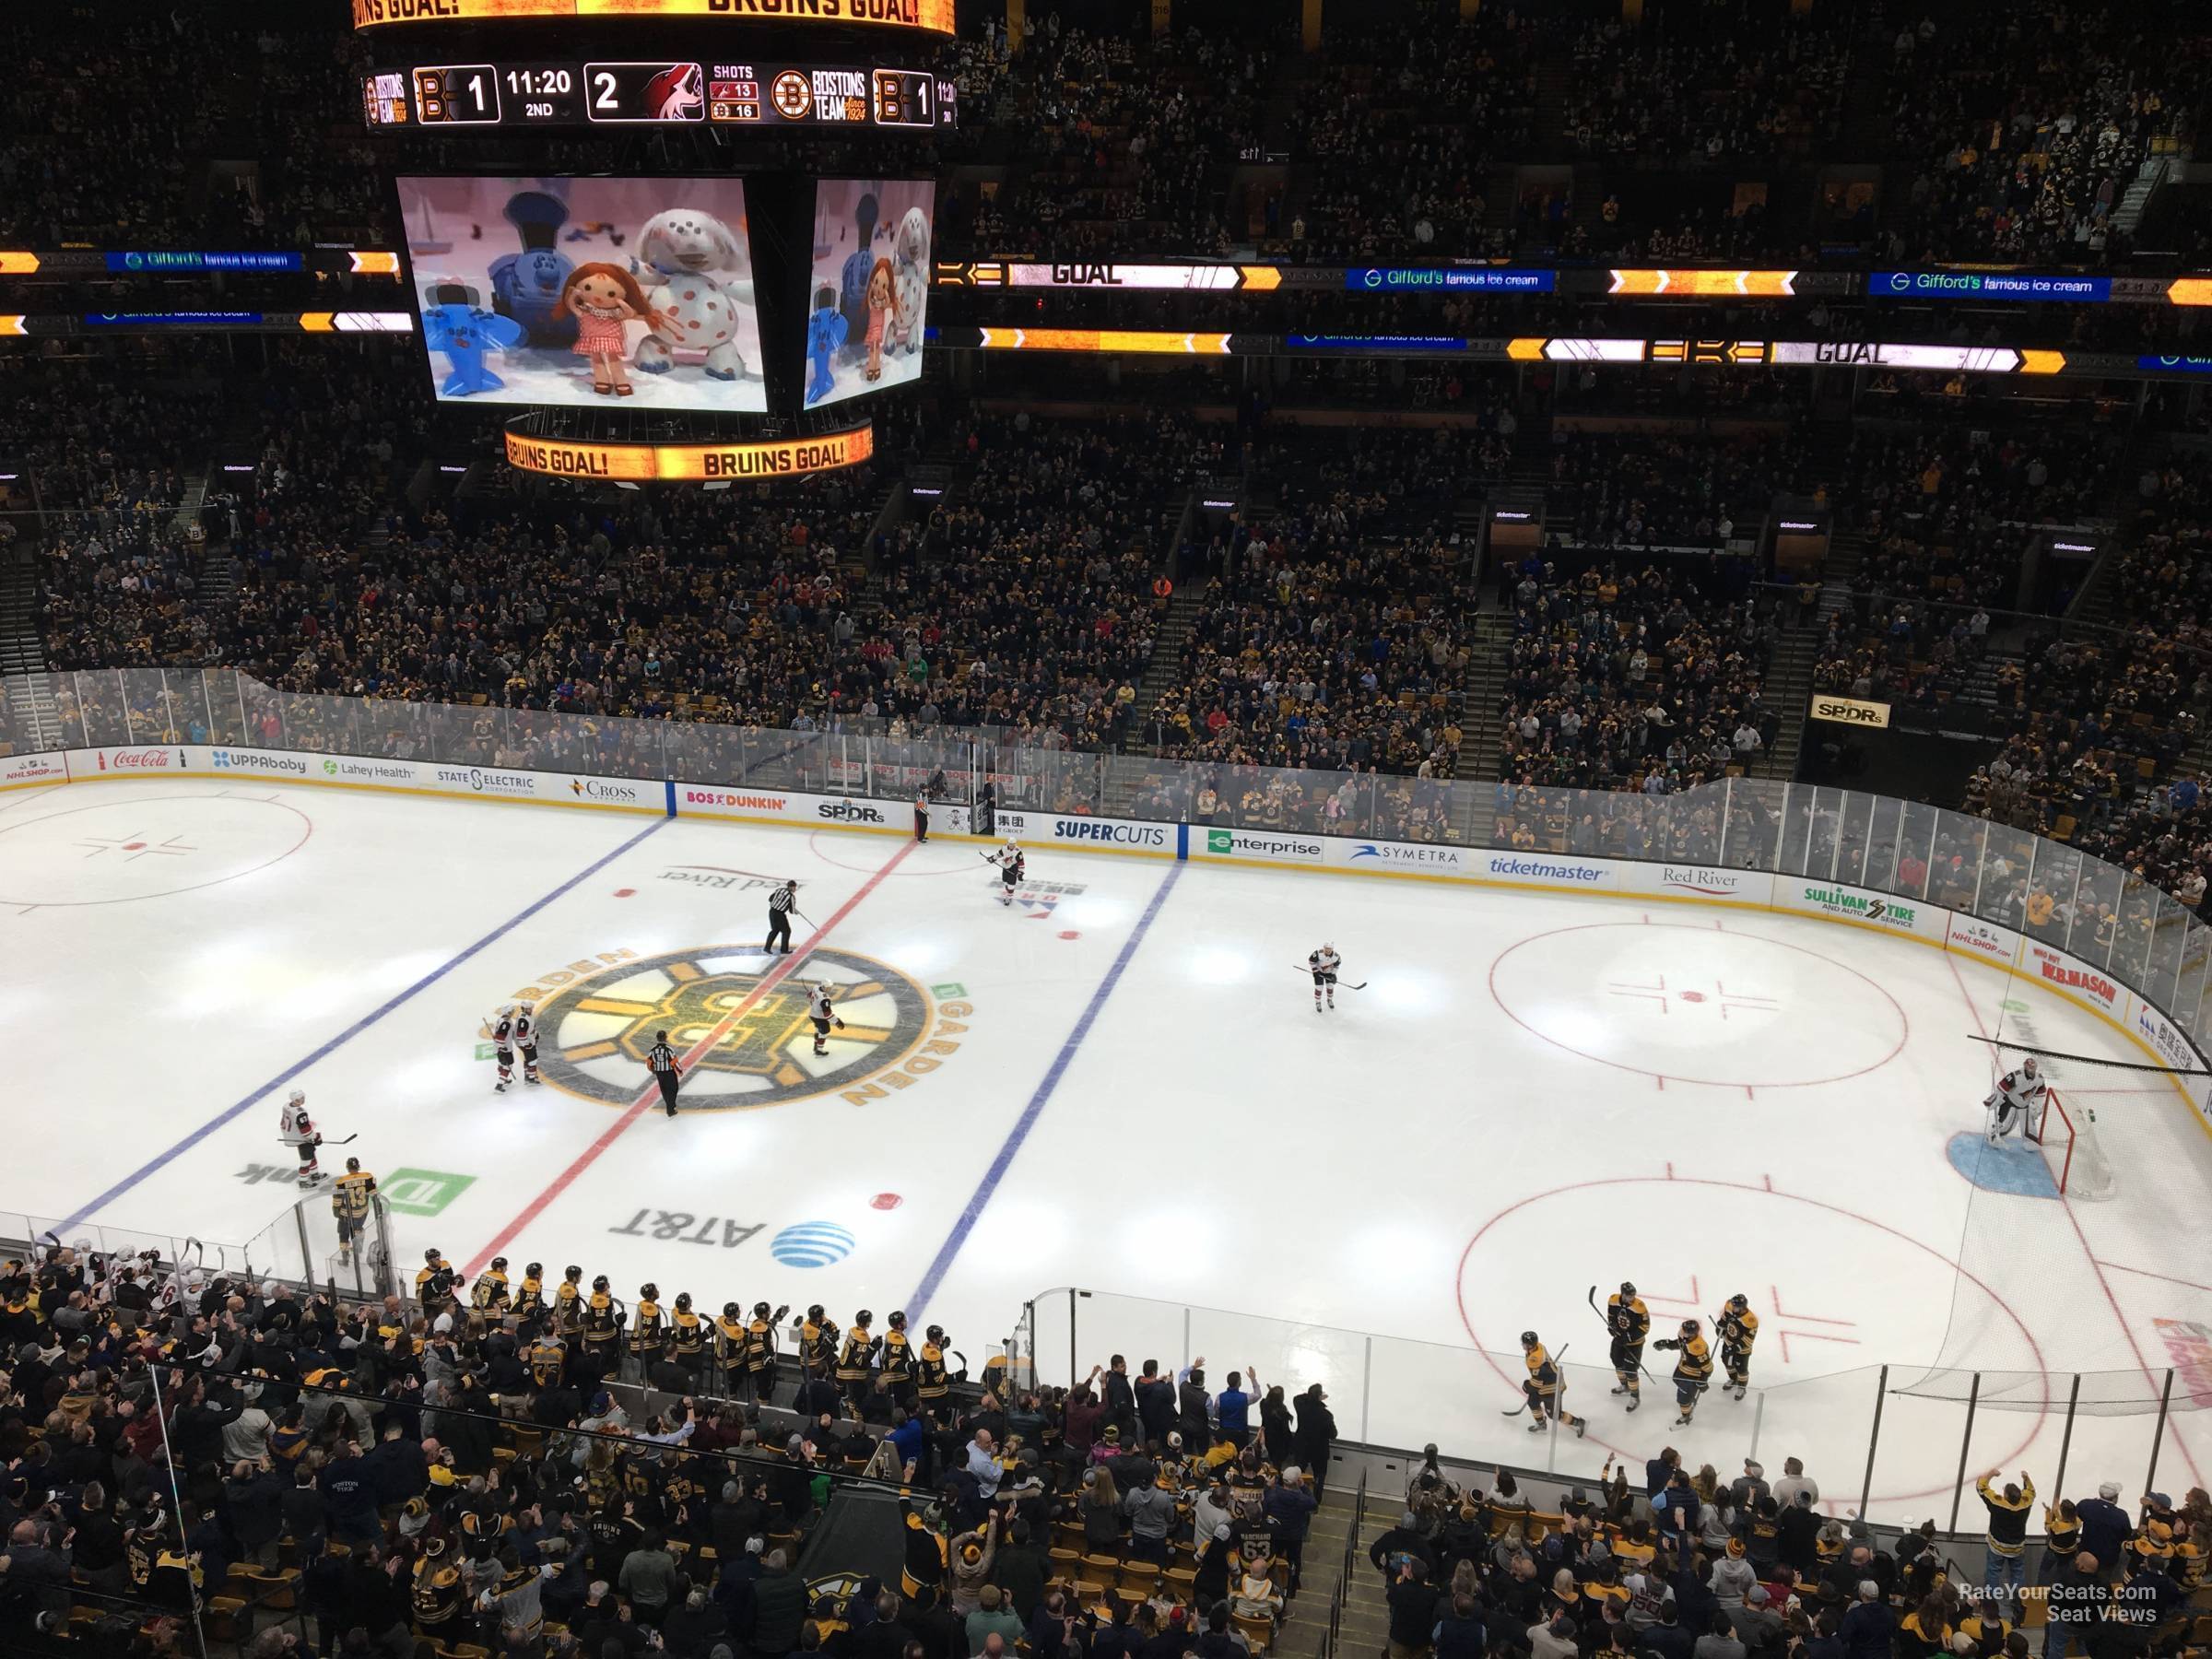 section 329, row 3 seat view  for hockey - td garden